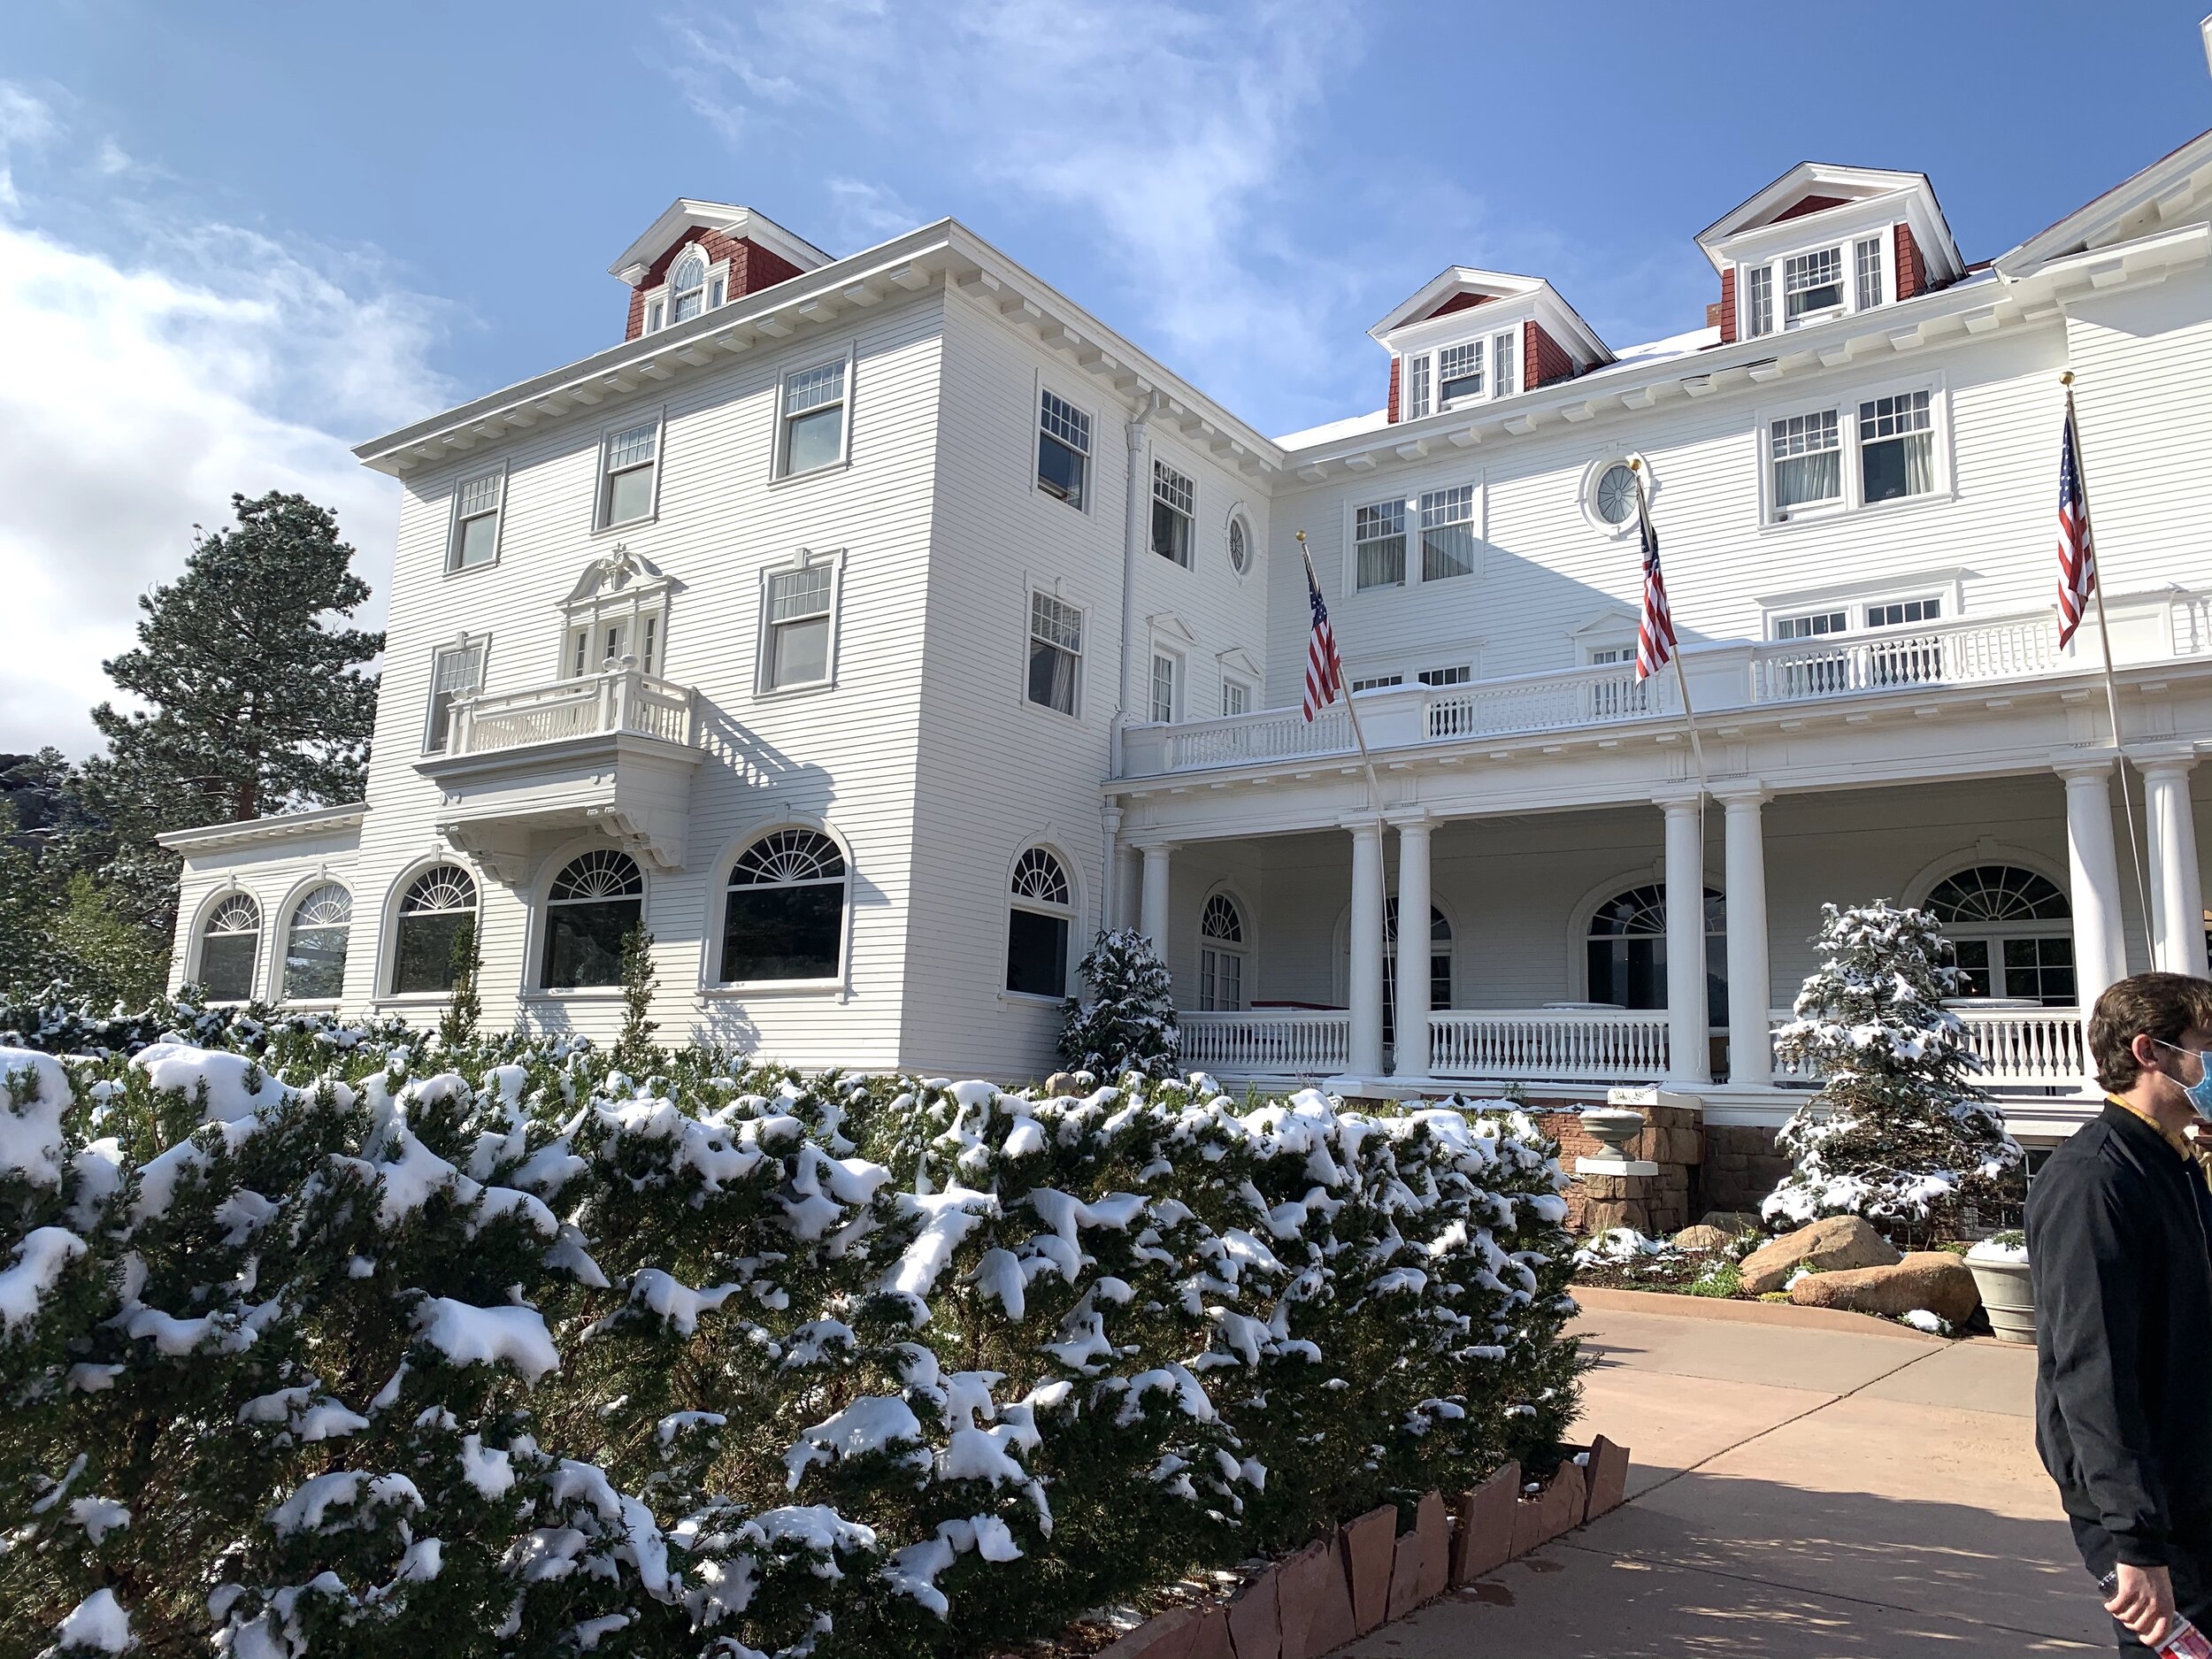  We took an interesting tour of the  Stanley Hotel . It was here, one fateful night, that  Steven King  passed through Estes Park and stopped to rent a room at this tattered and spooky hotel.  One  remaining suite that had not been winterized for the